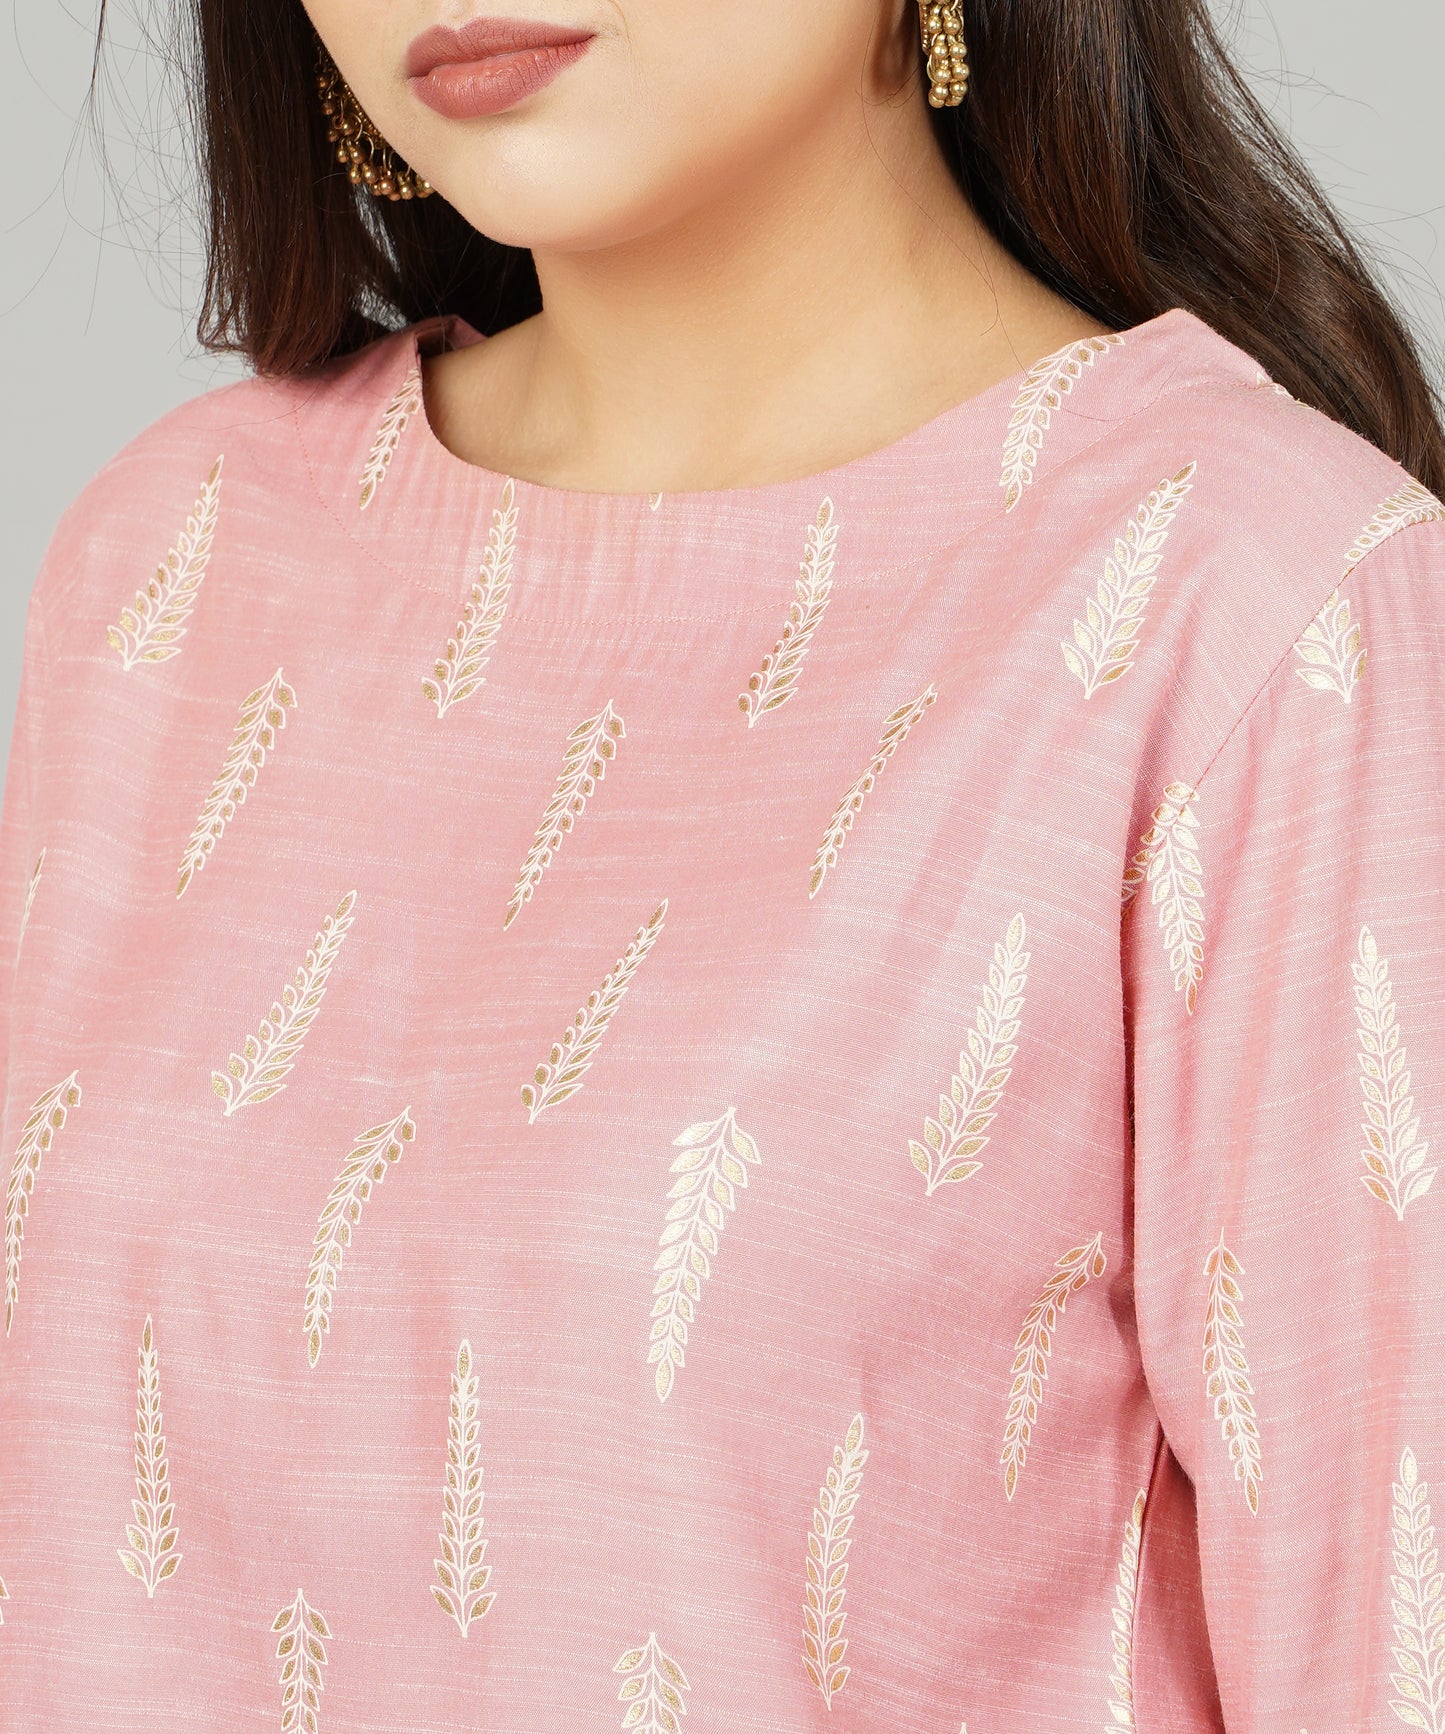 "Anushil Foil Printed Pink Cotton Kurti/Top for Women/Girls - Stylish and Comfortable